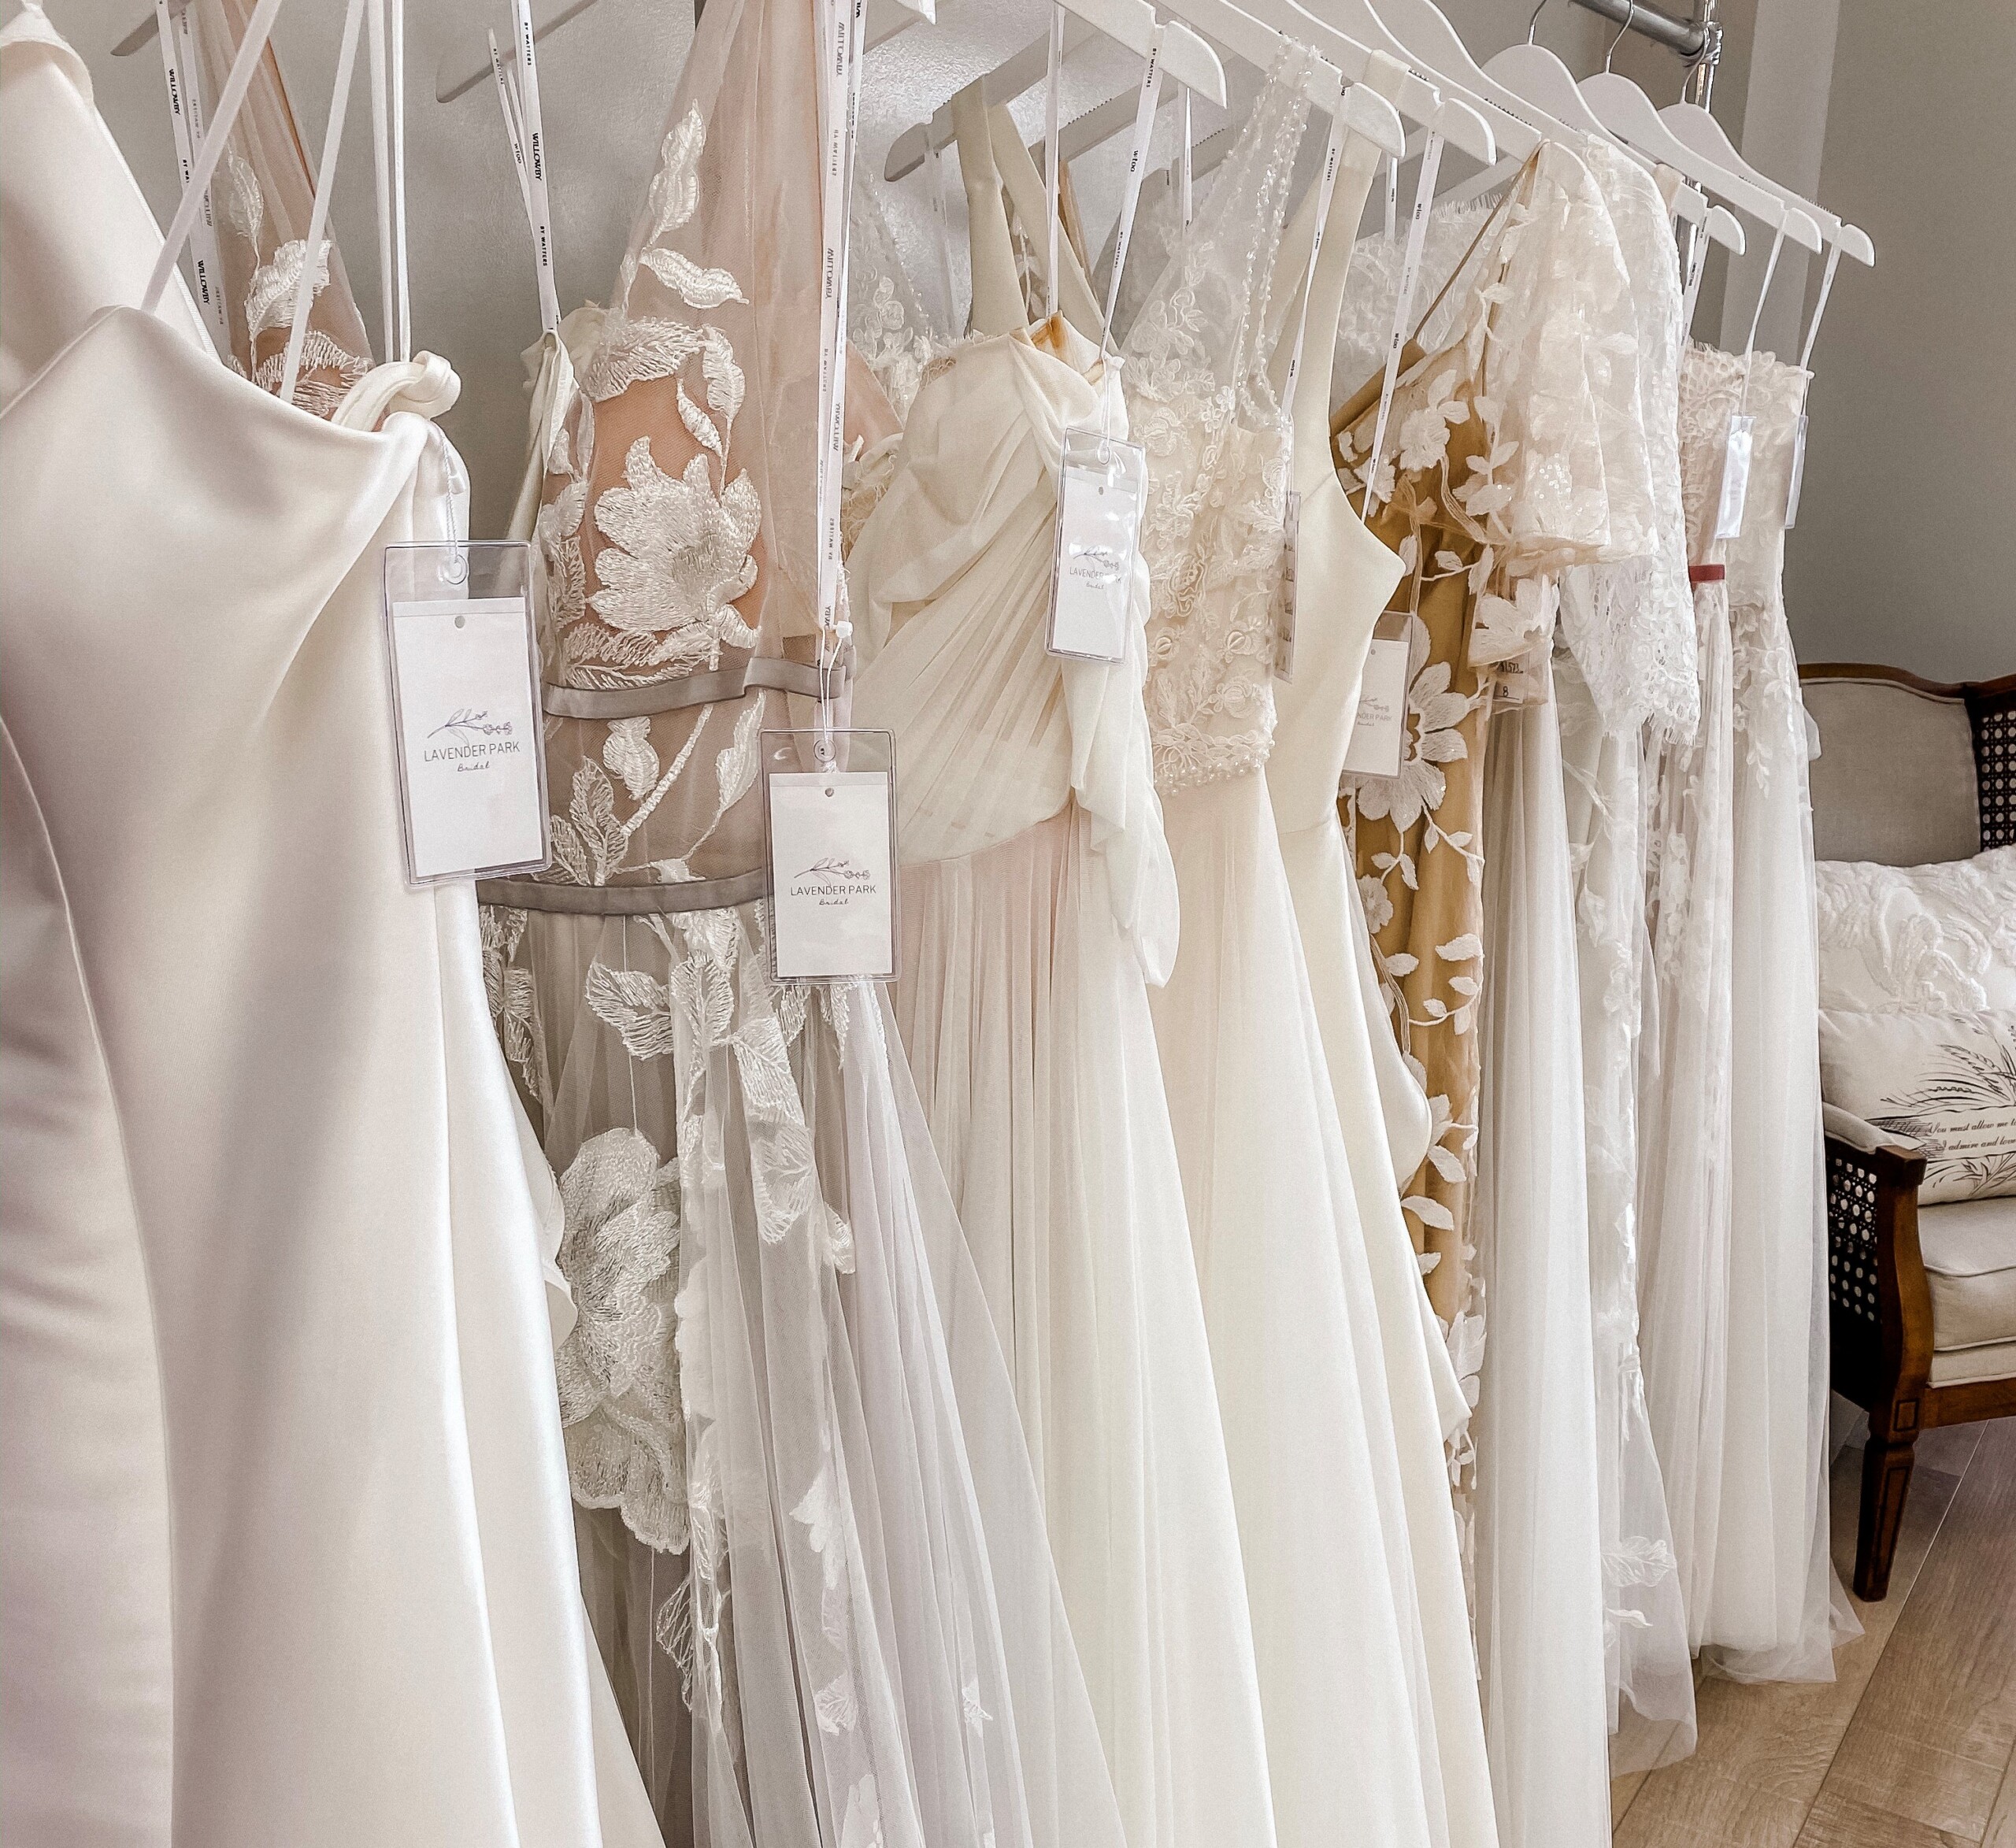 The Difference Between Trunk Shows, Sample Sales + More from Lavender Park Bridal